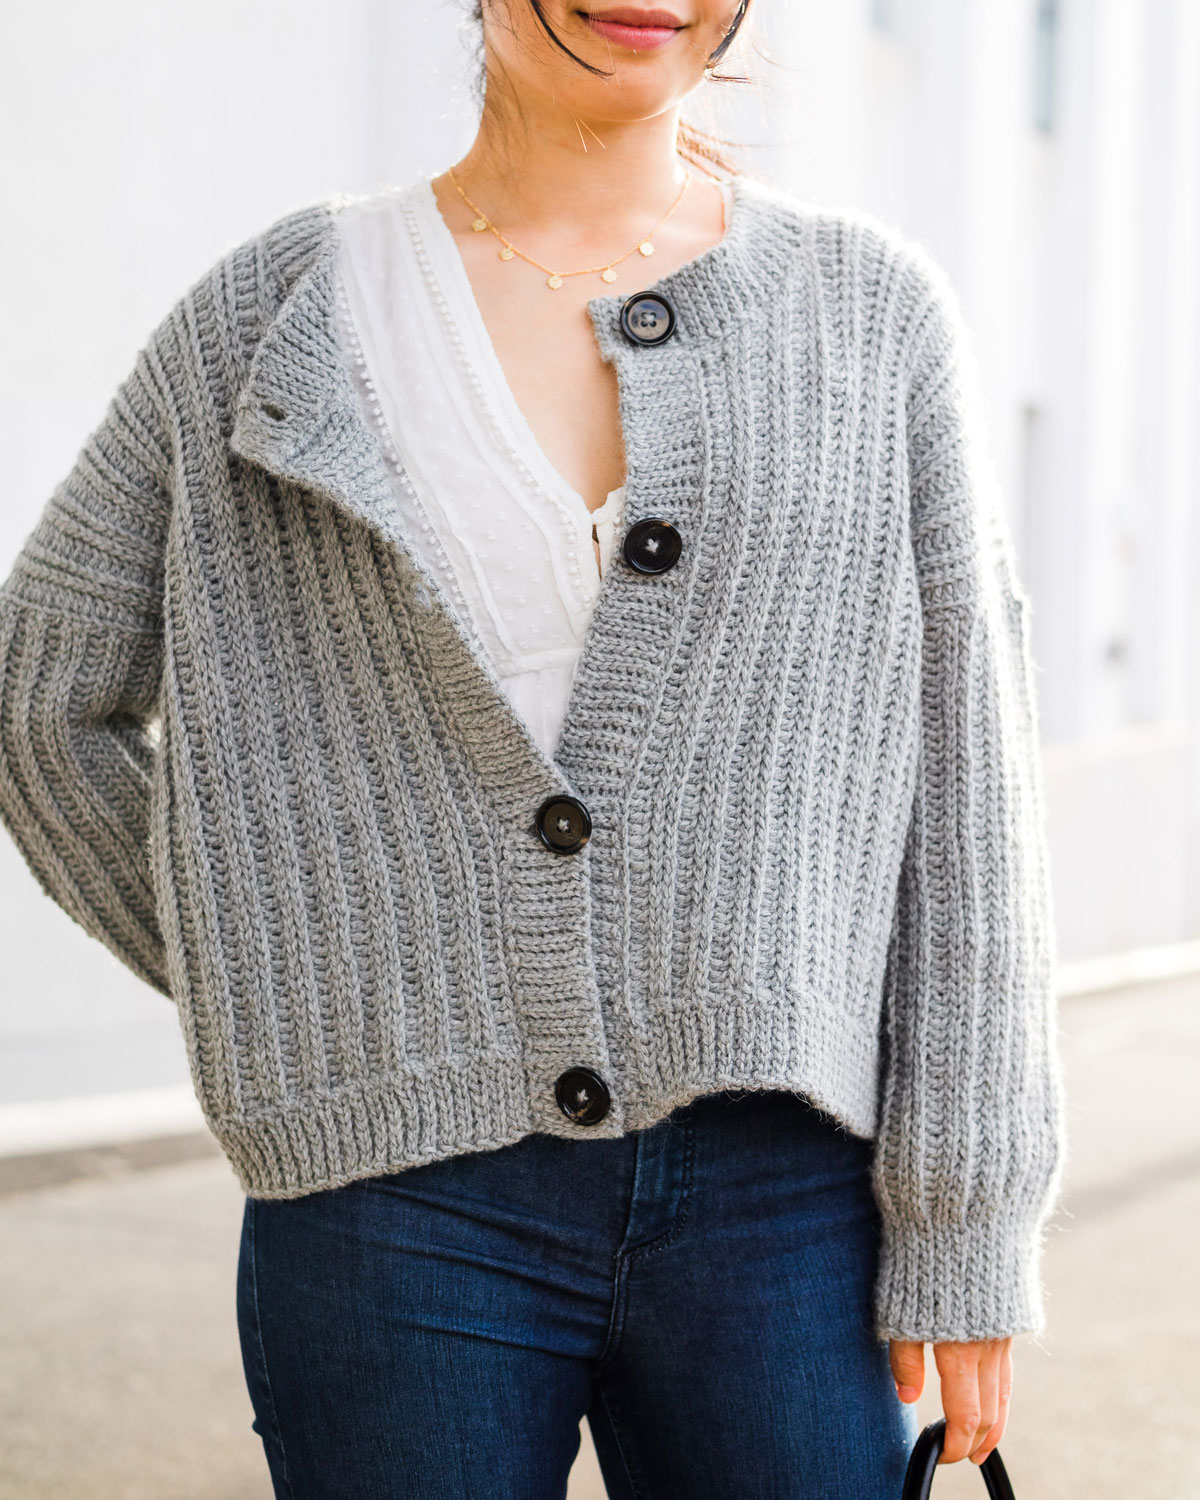 Crochet Ribbed Button Cardigan - free pattern + video | For The Frills